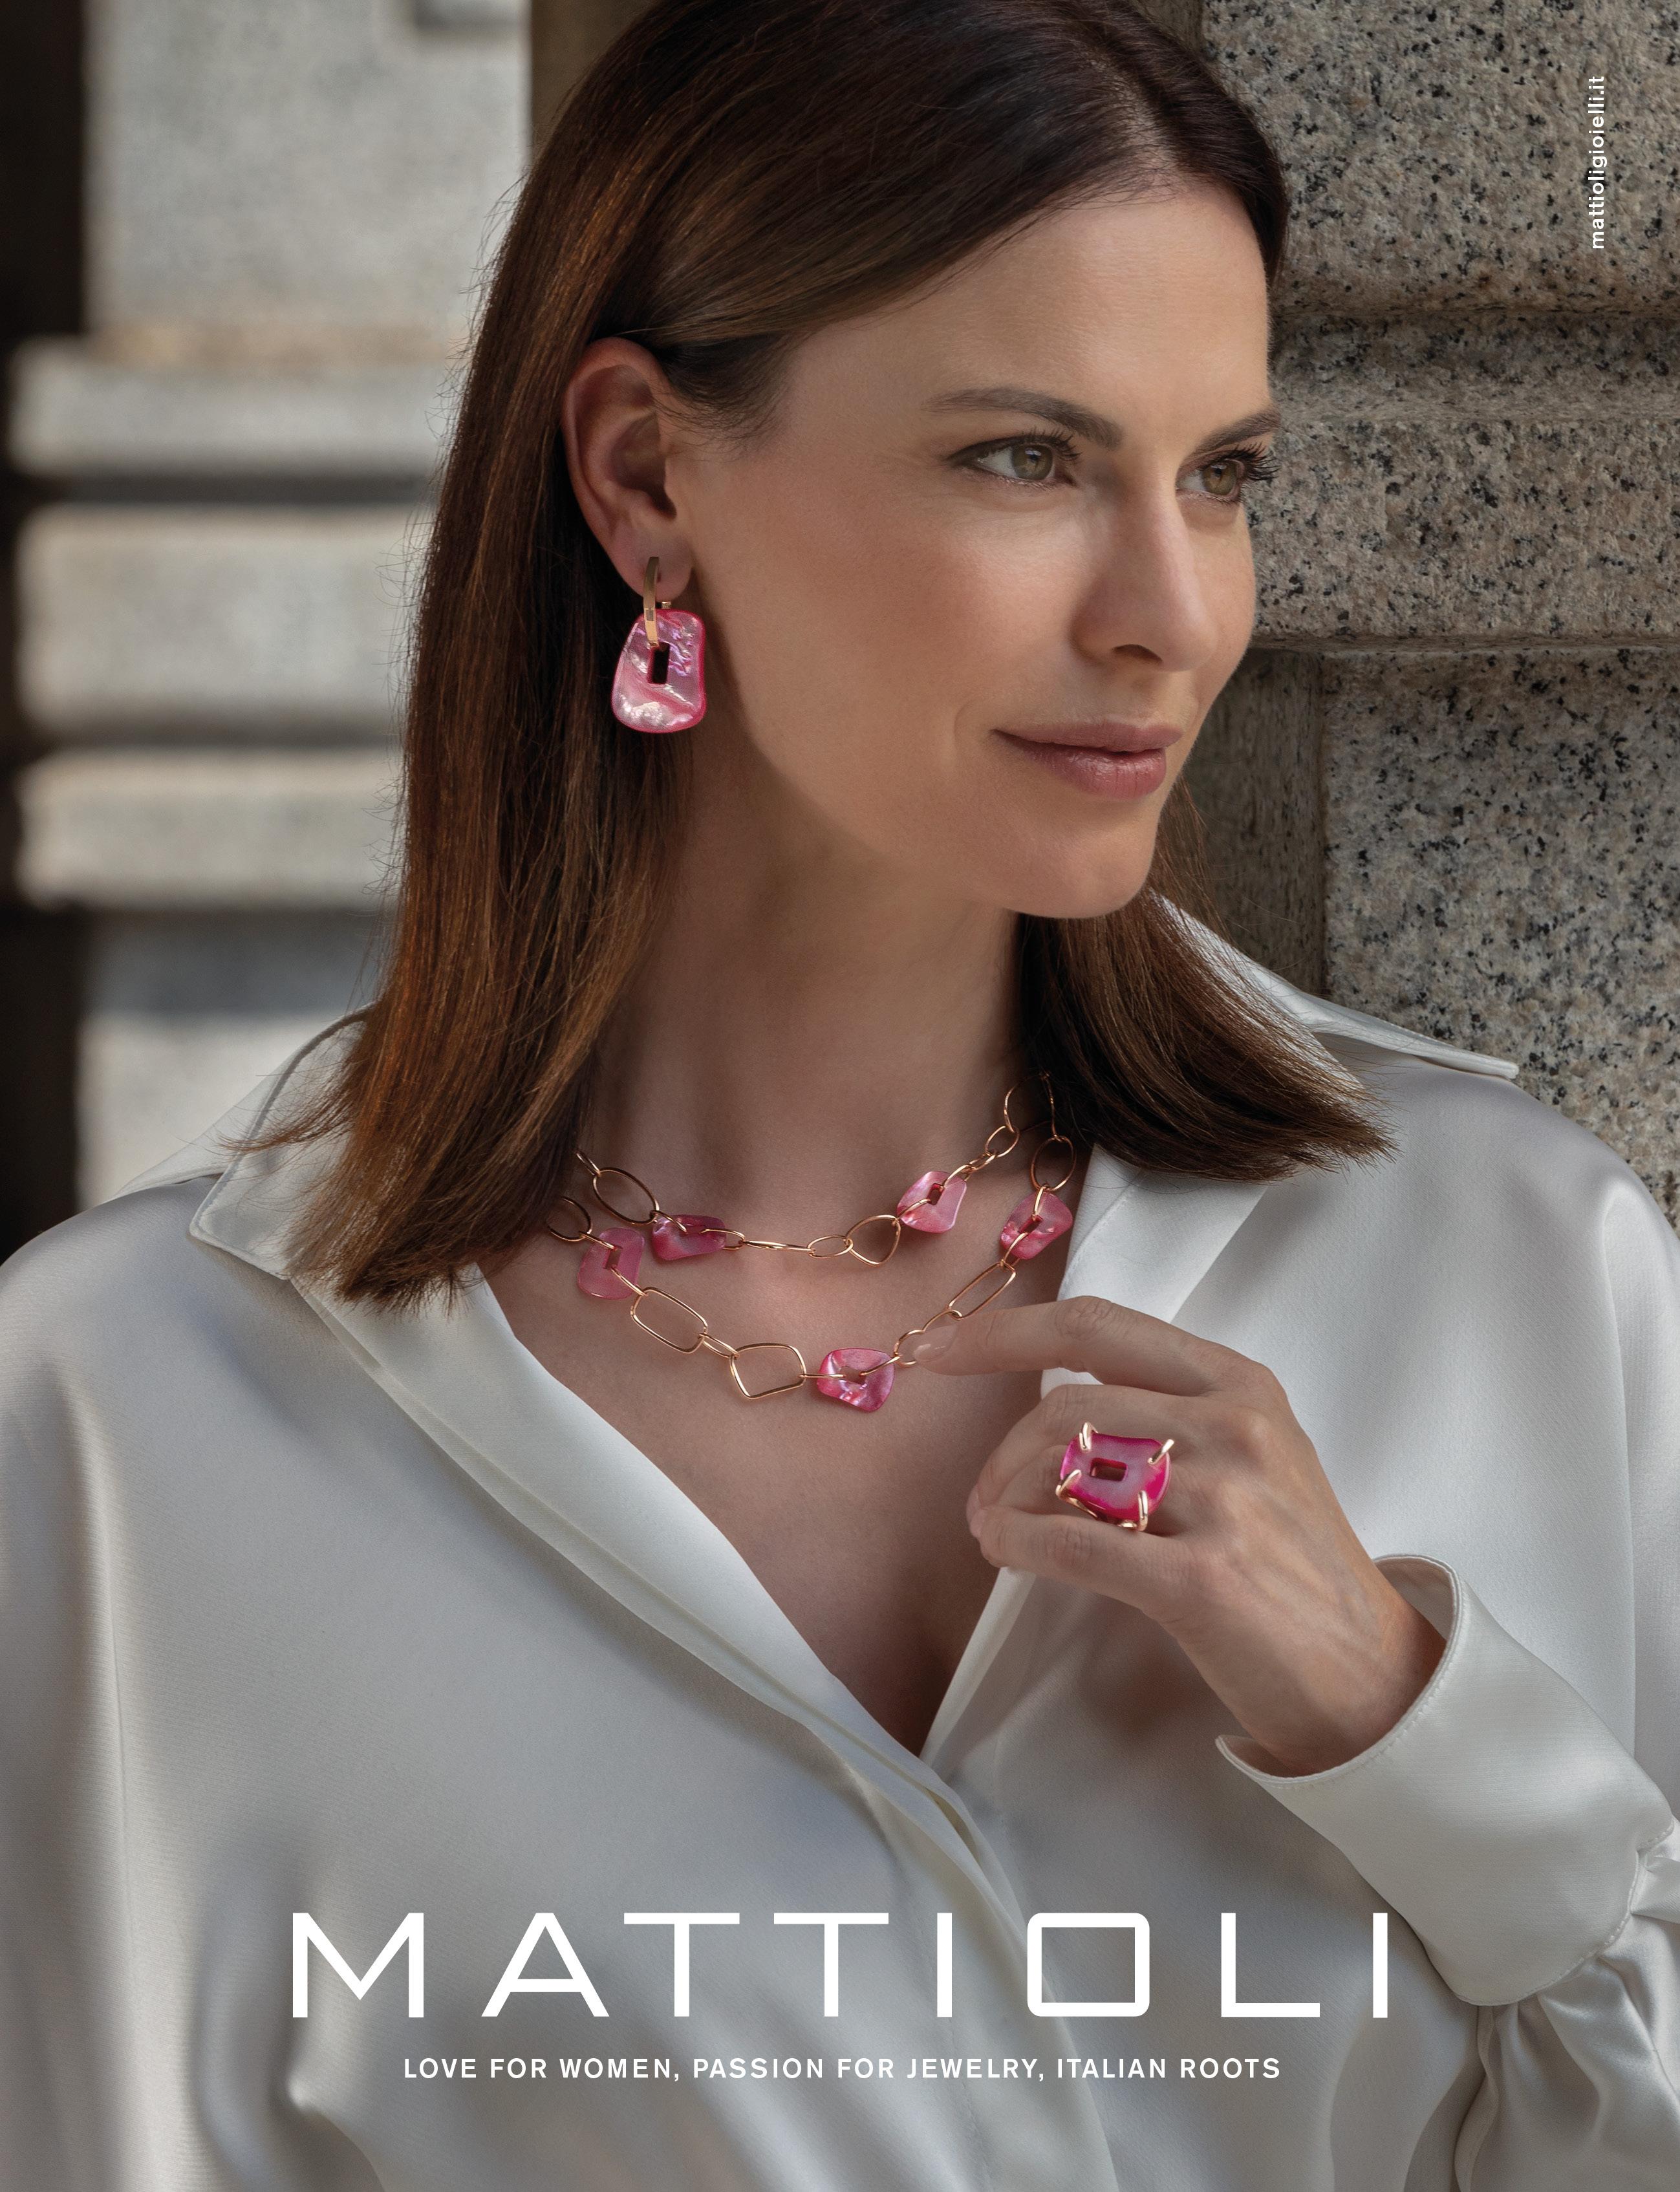 Mattioli Puzzle Collection 18k Rose Gold, Small Size
and three coloured pairs of puzzles to your choice
Measure 15x18 mm / 0,59x0,70 in. 
Gold Weight 04,00gr  
Puzzle pendants of mother of pearl you can choose between 25 colour palette
Available in